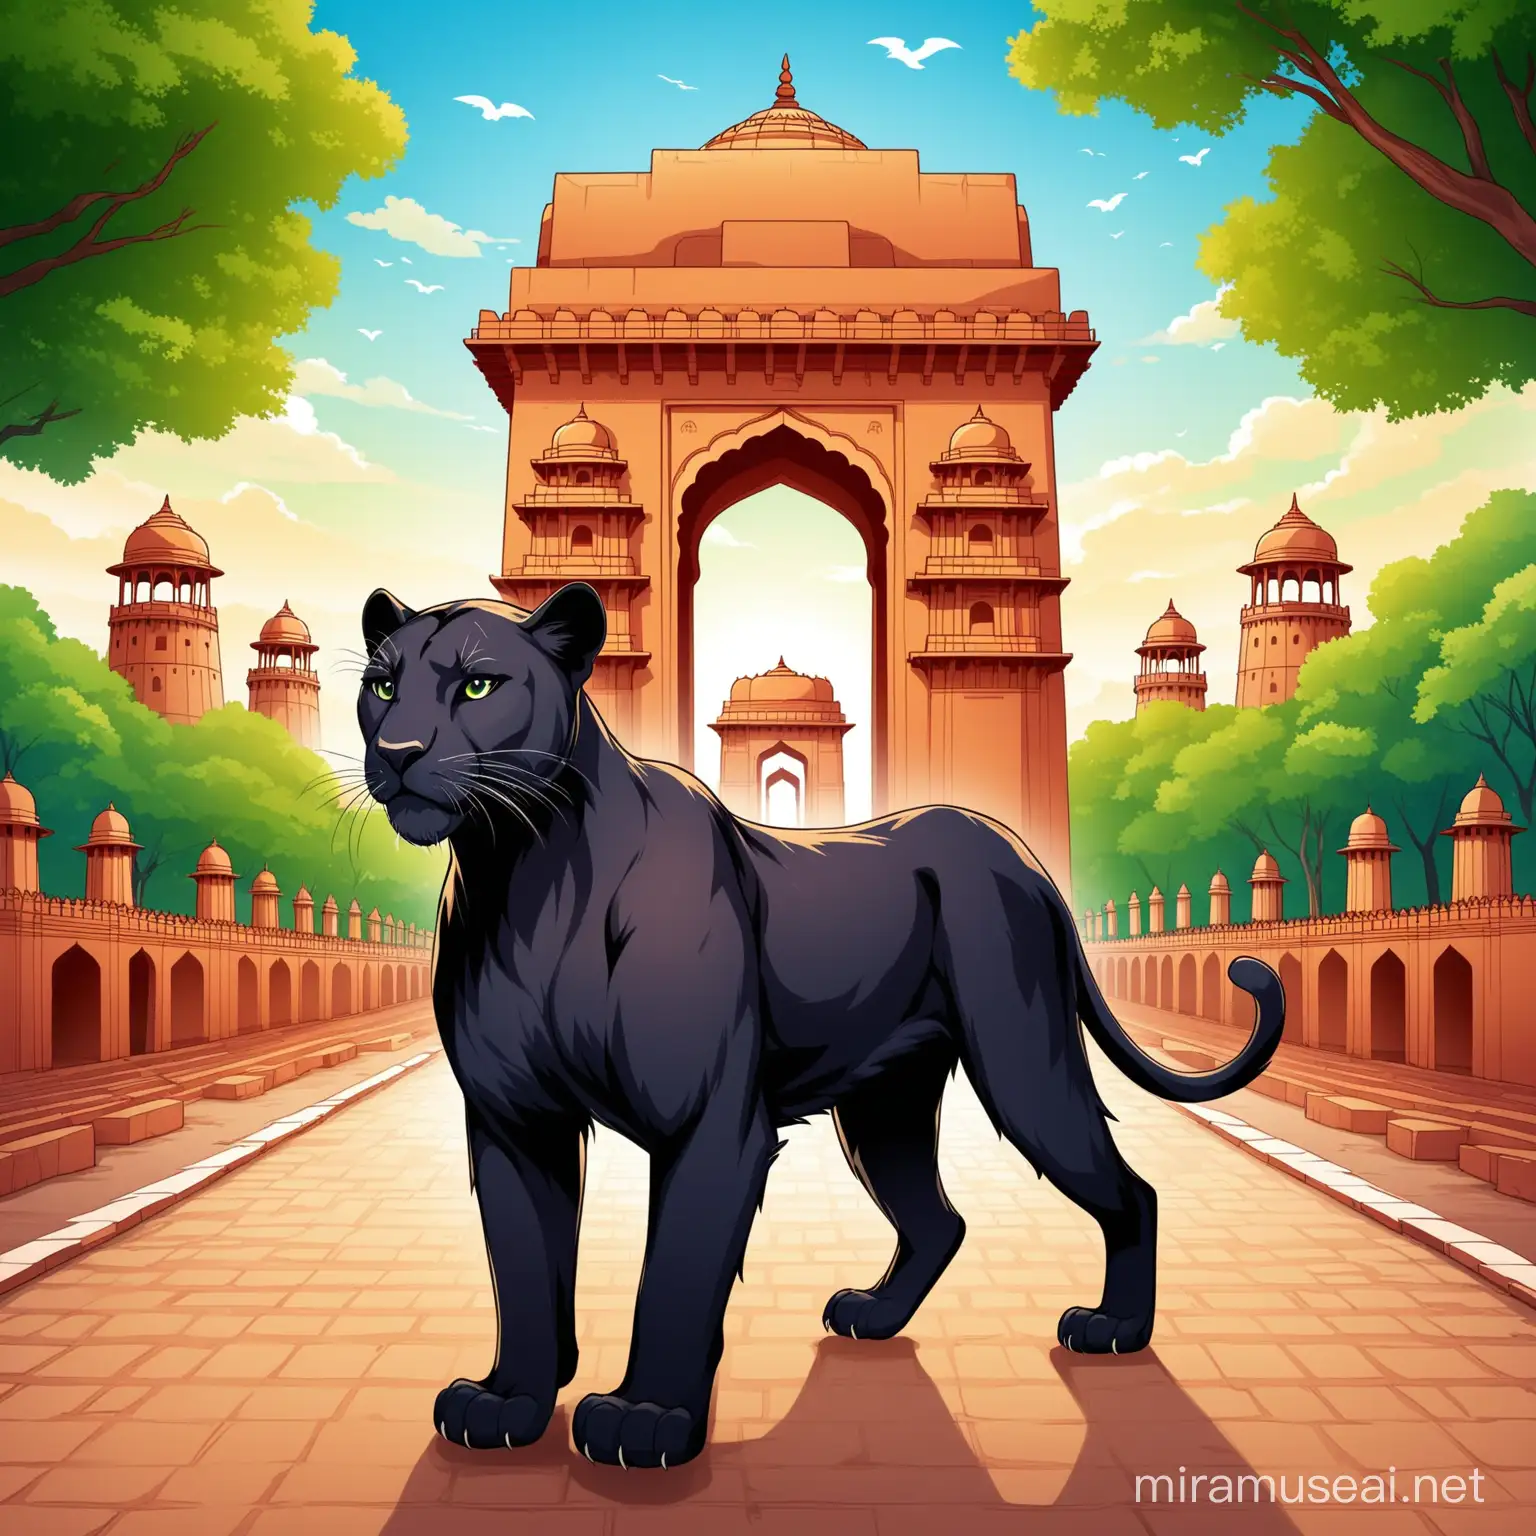 Create a mascot using panther as the animal with combination of nature and Delhi's heritage sites 